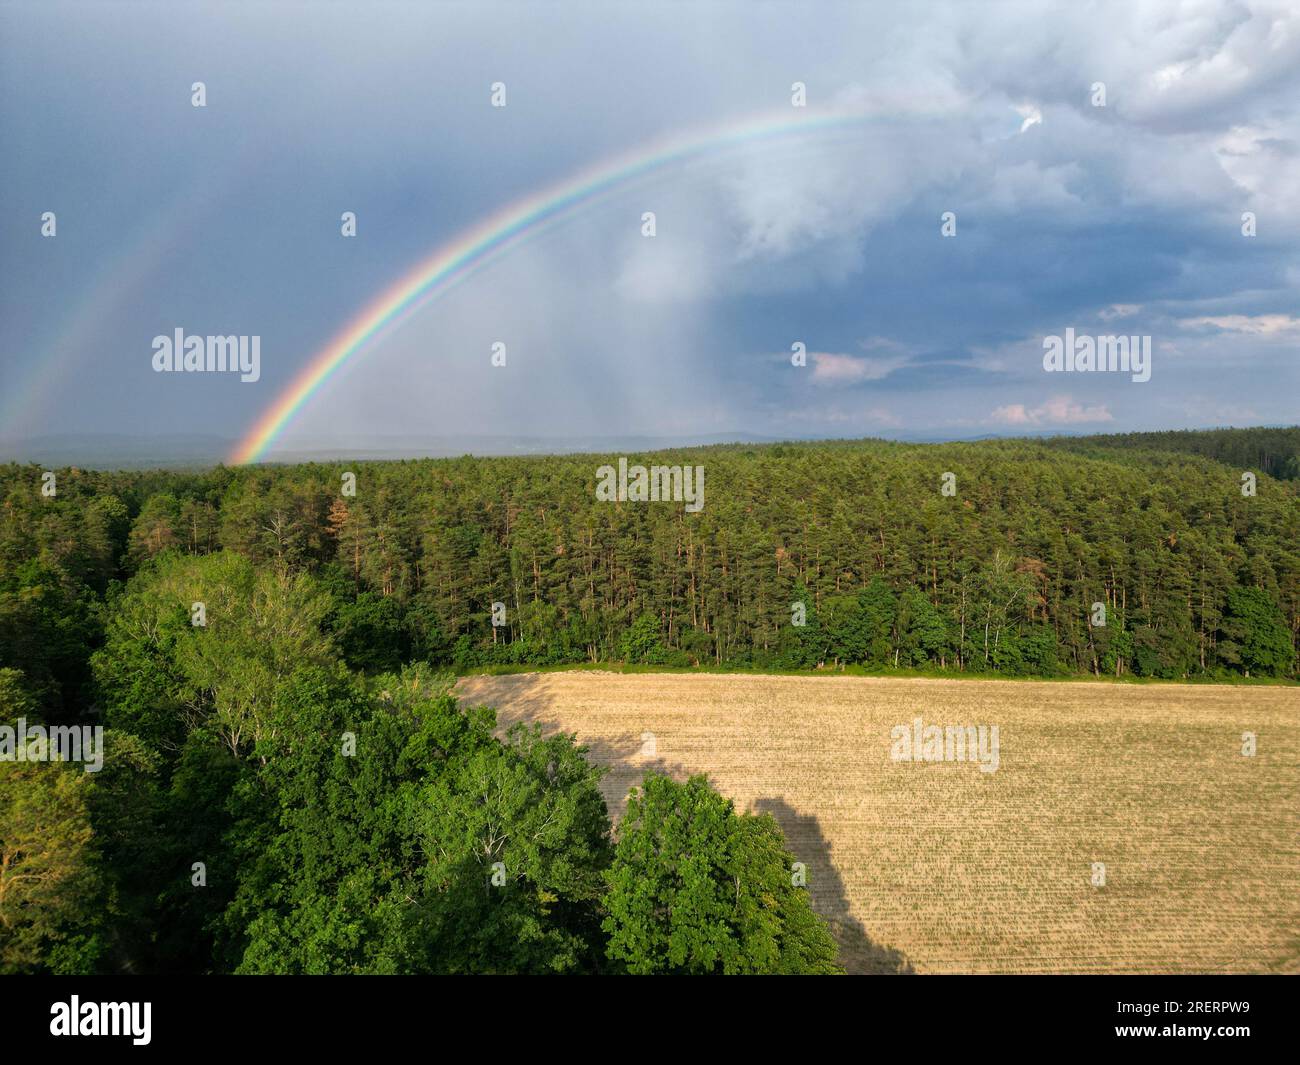 Beautiful double rainbow arching over field and forest with dark clouds and rain in the background Stock Photo